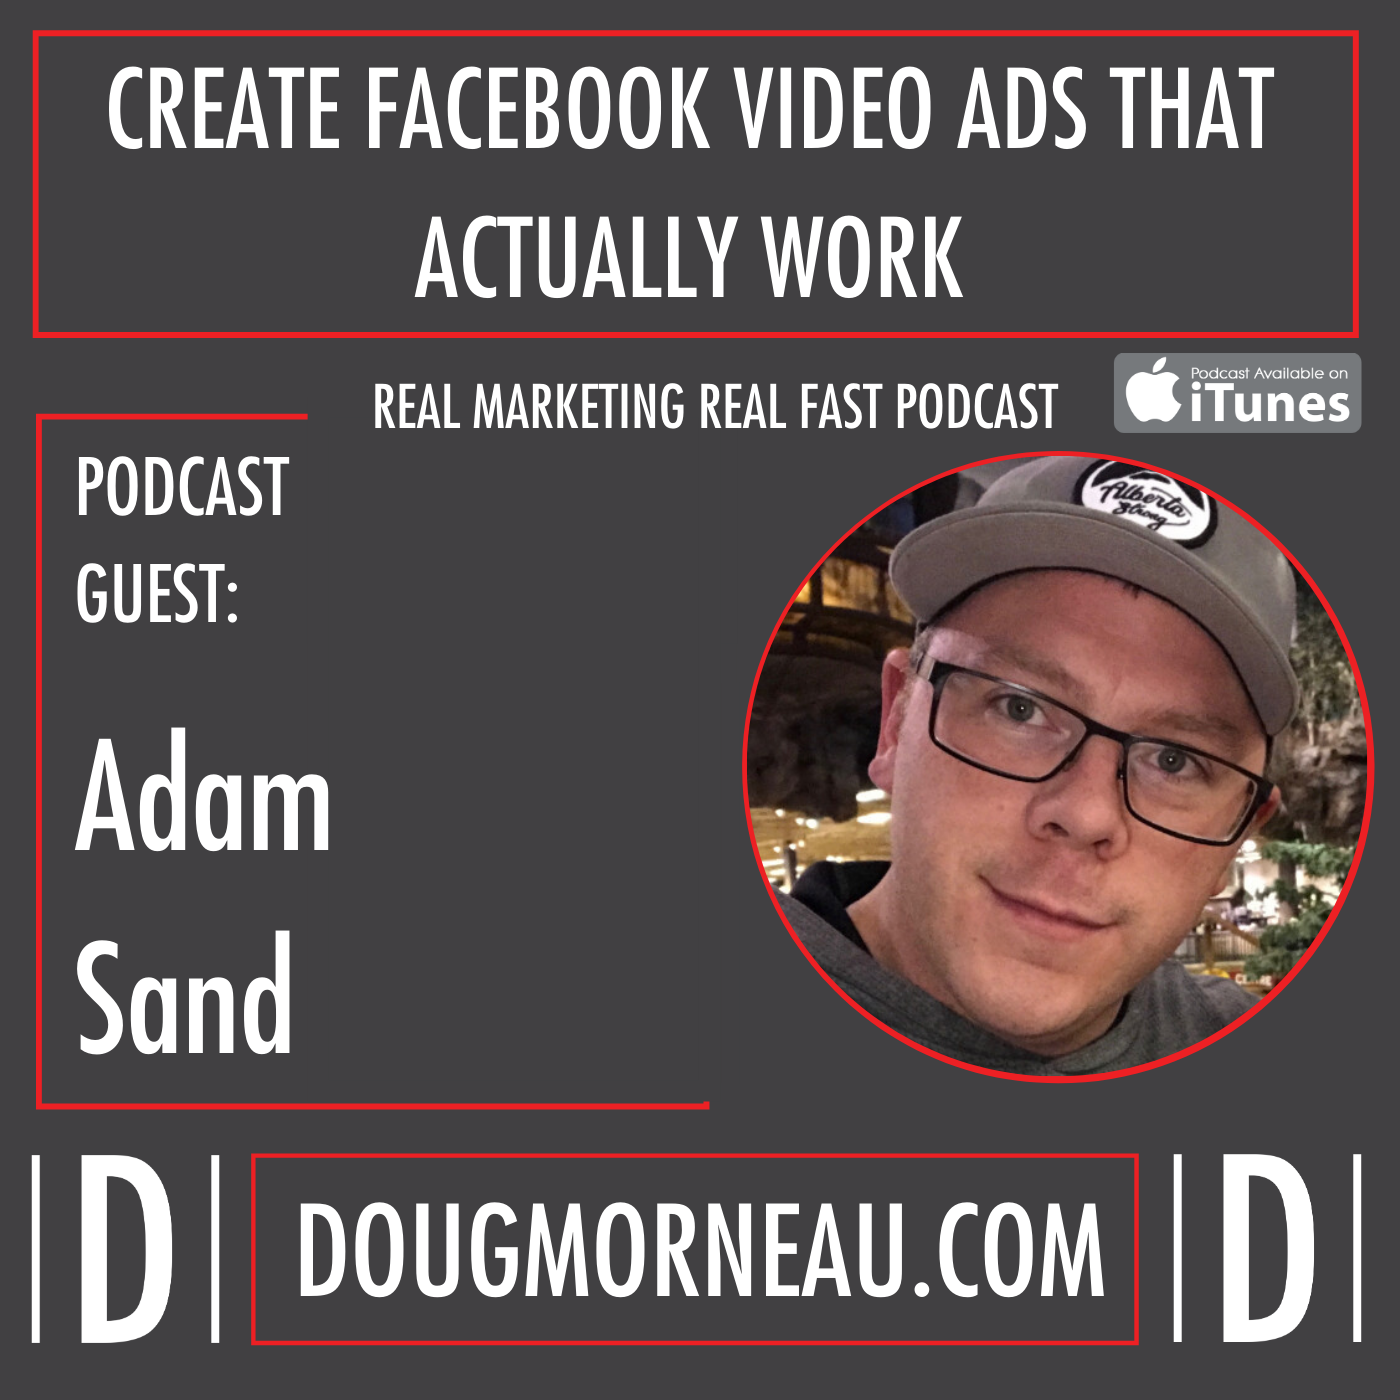 CREATE FACEBOOK VIDEO ADS THAT ACTUALLY WORK WITH ADAM SAND - DOUG MORNEAU - REAL MARKETING REAL FAST PODCAST